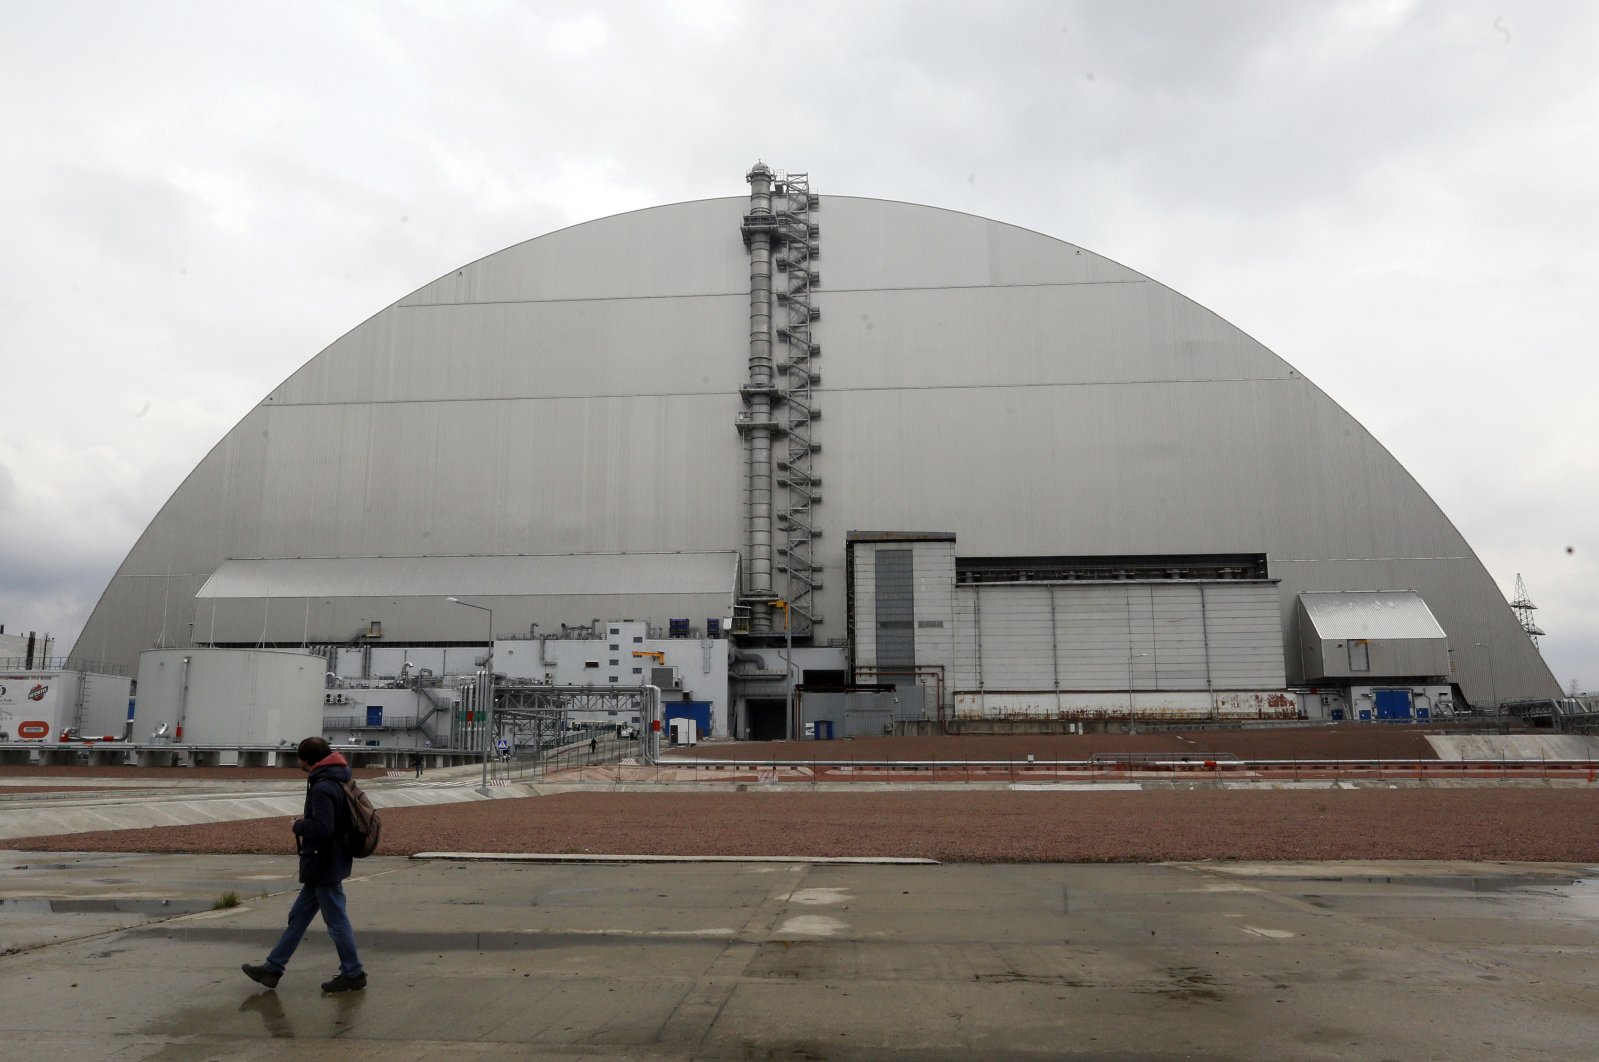 A man walks past a shelter covering the exploded reactor at the Chernobyl nuclear plant, in Chernobyl, Ukraine, April 15, 2021. (AP File Photo)